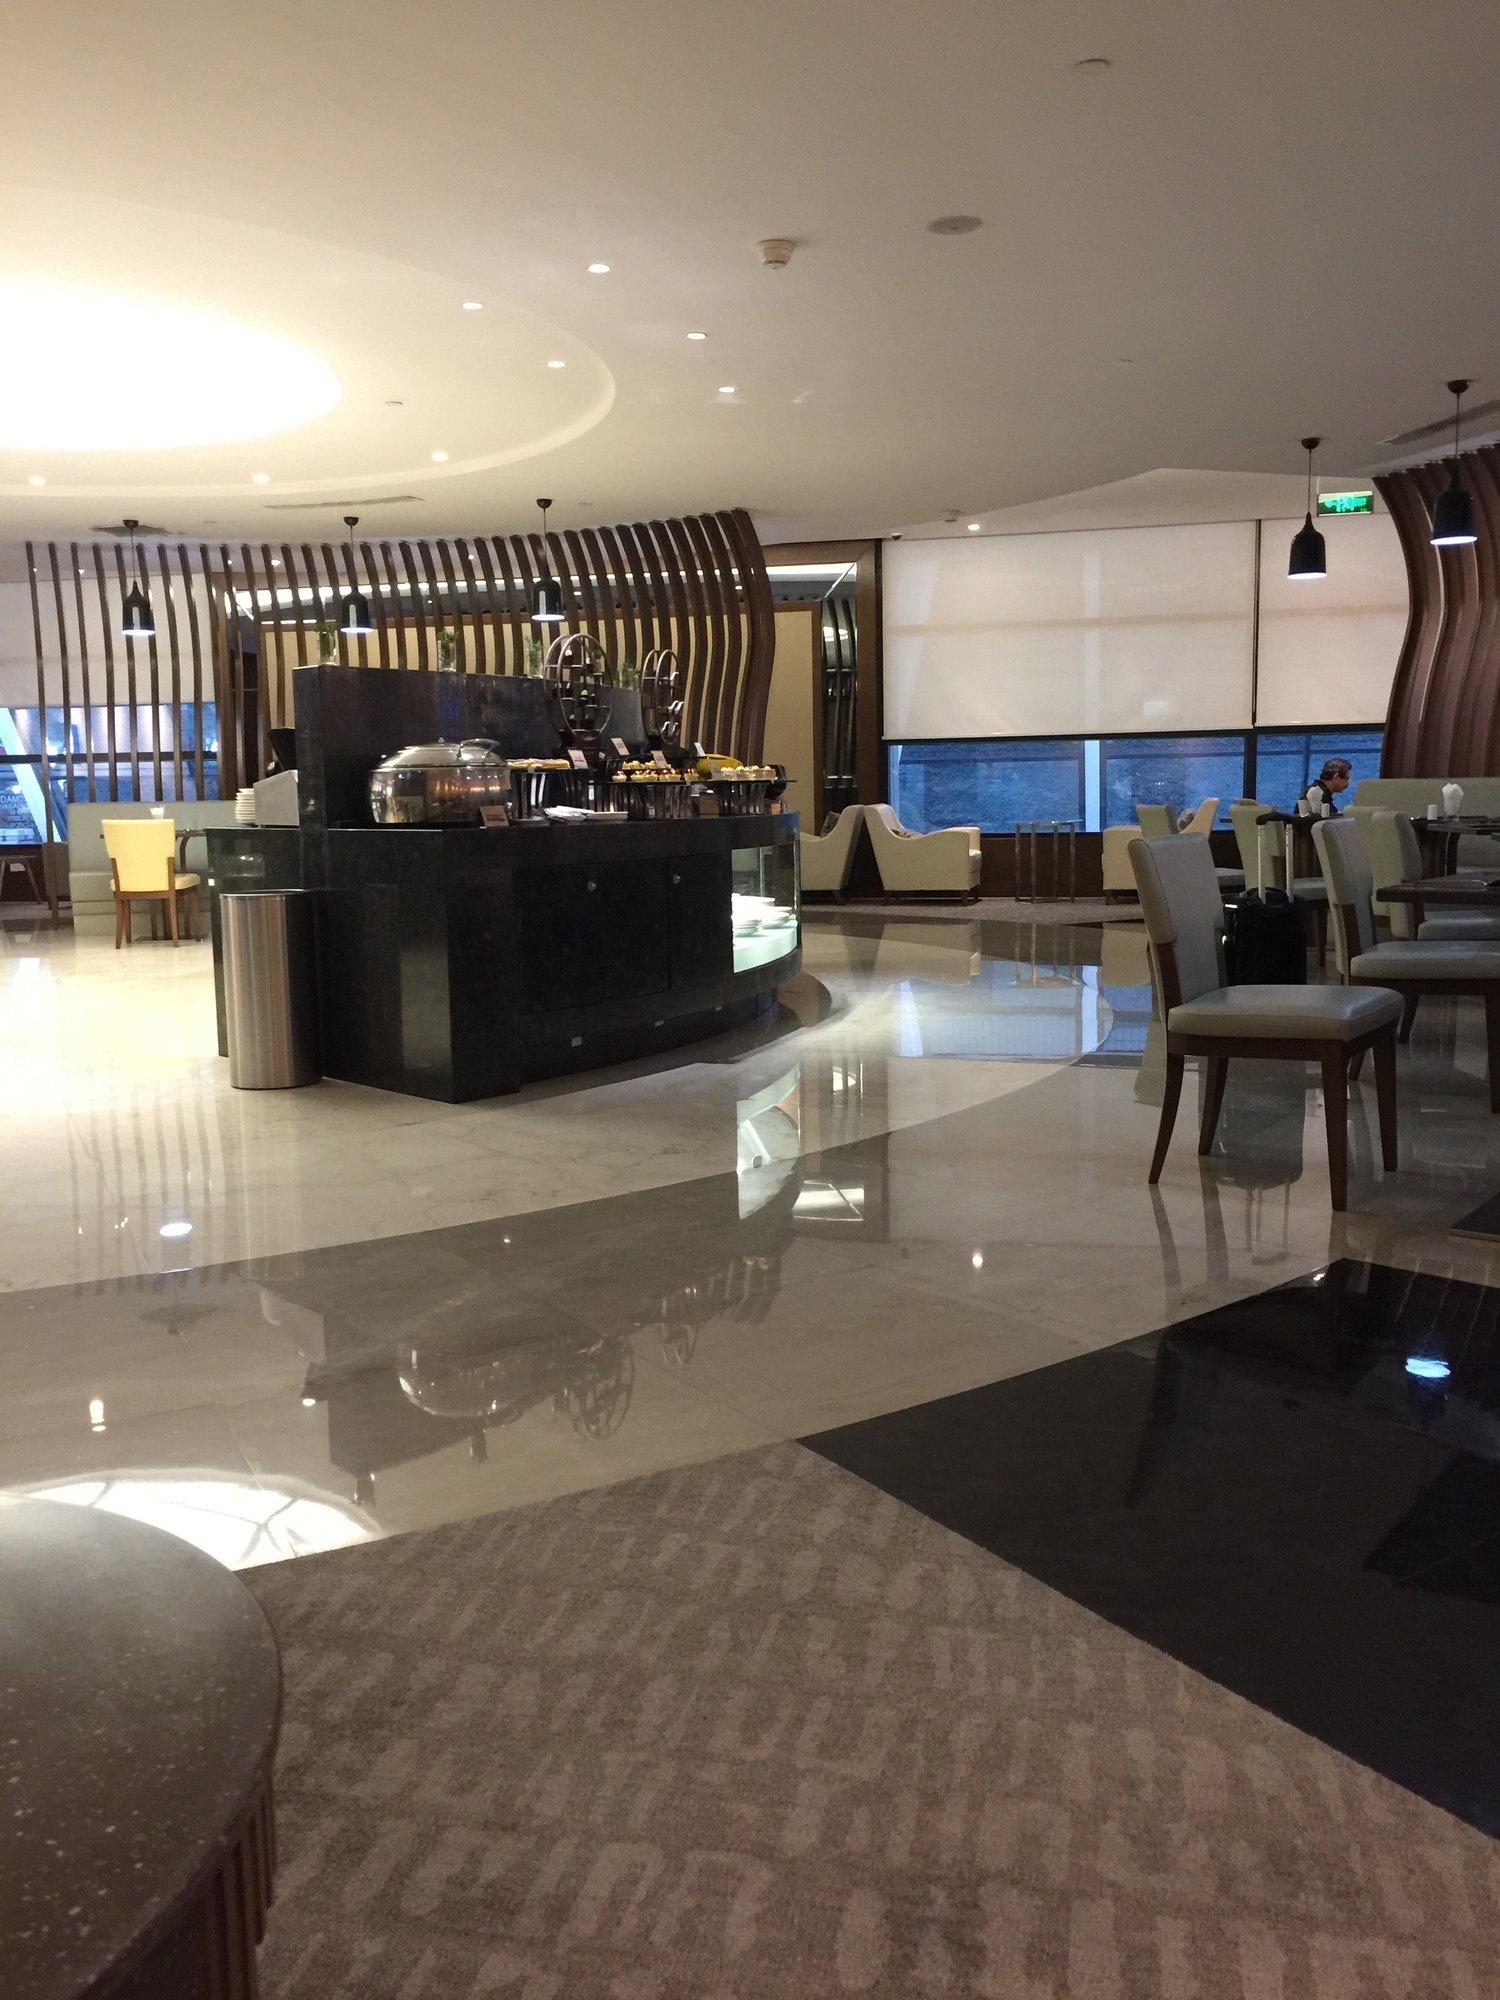 No. 71 Air China First Class Lounge image 1 of 10